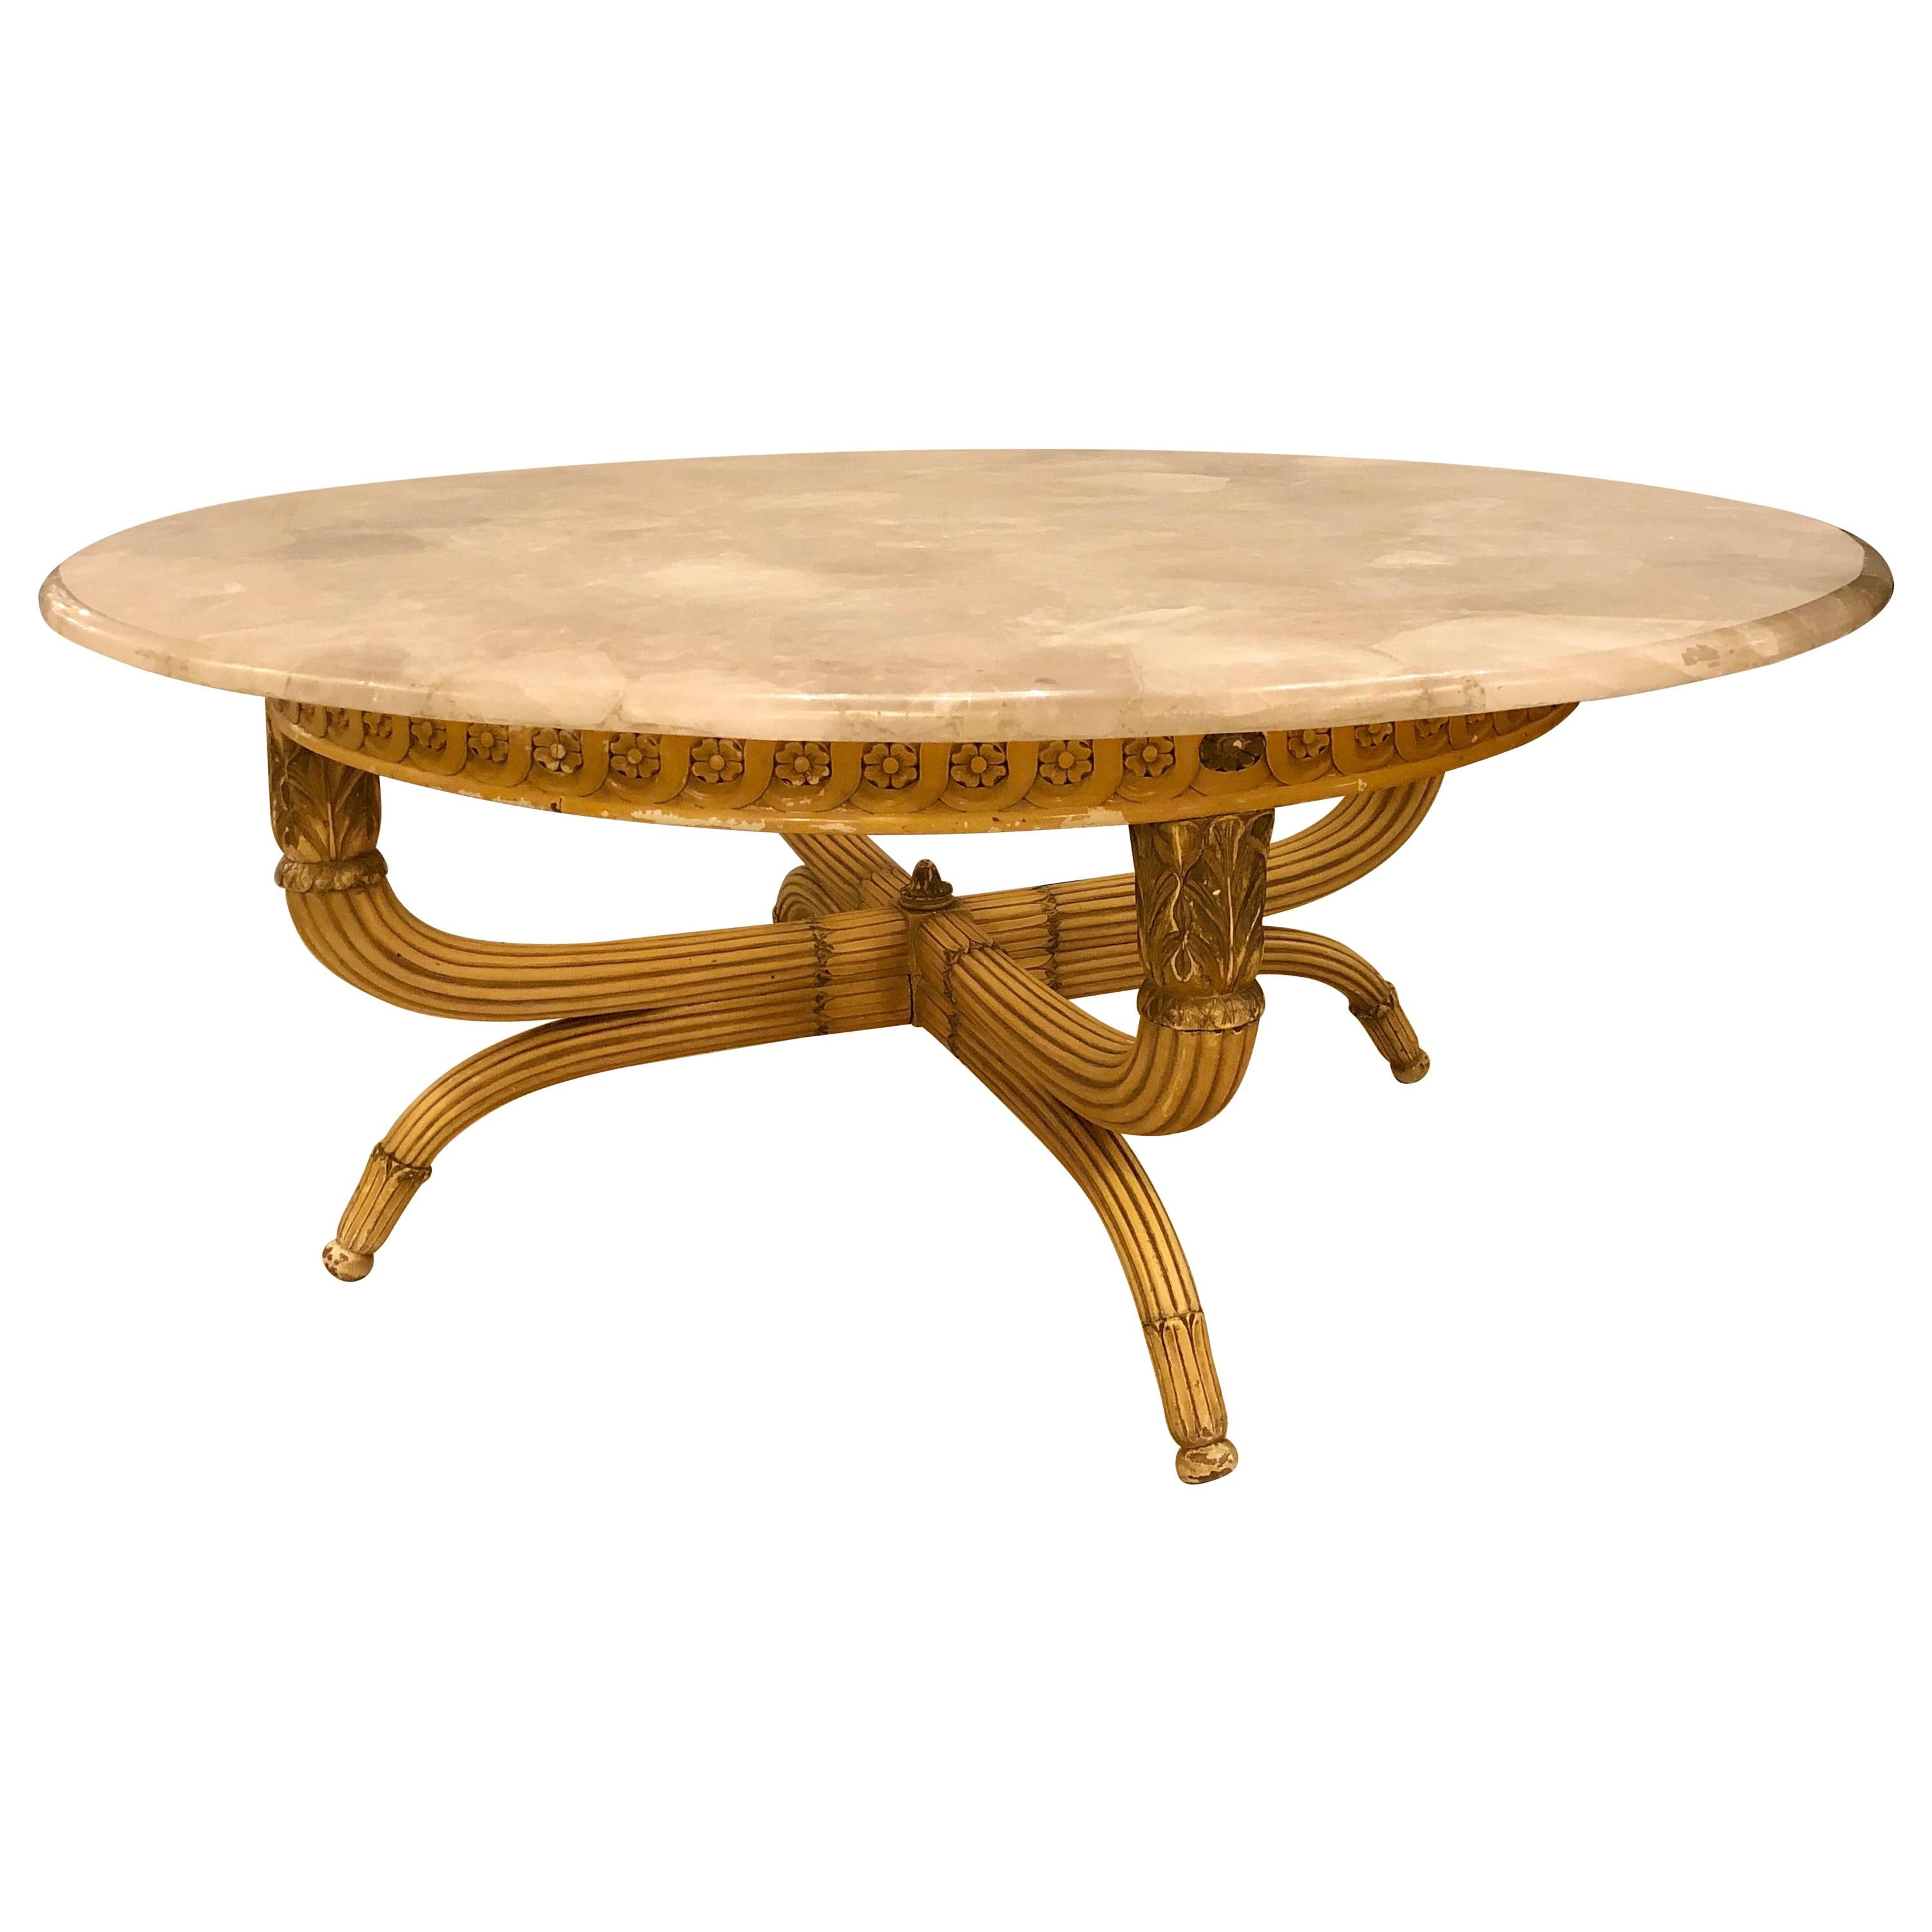 Solid Rock Crystal Circular Table Top Coffee, Dining or Centre Table